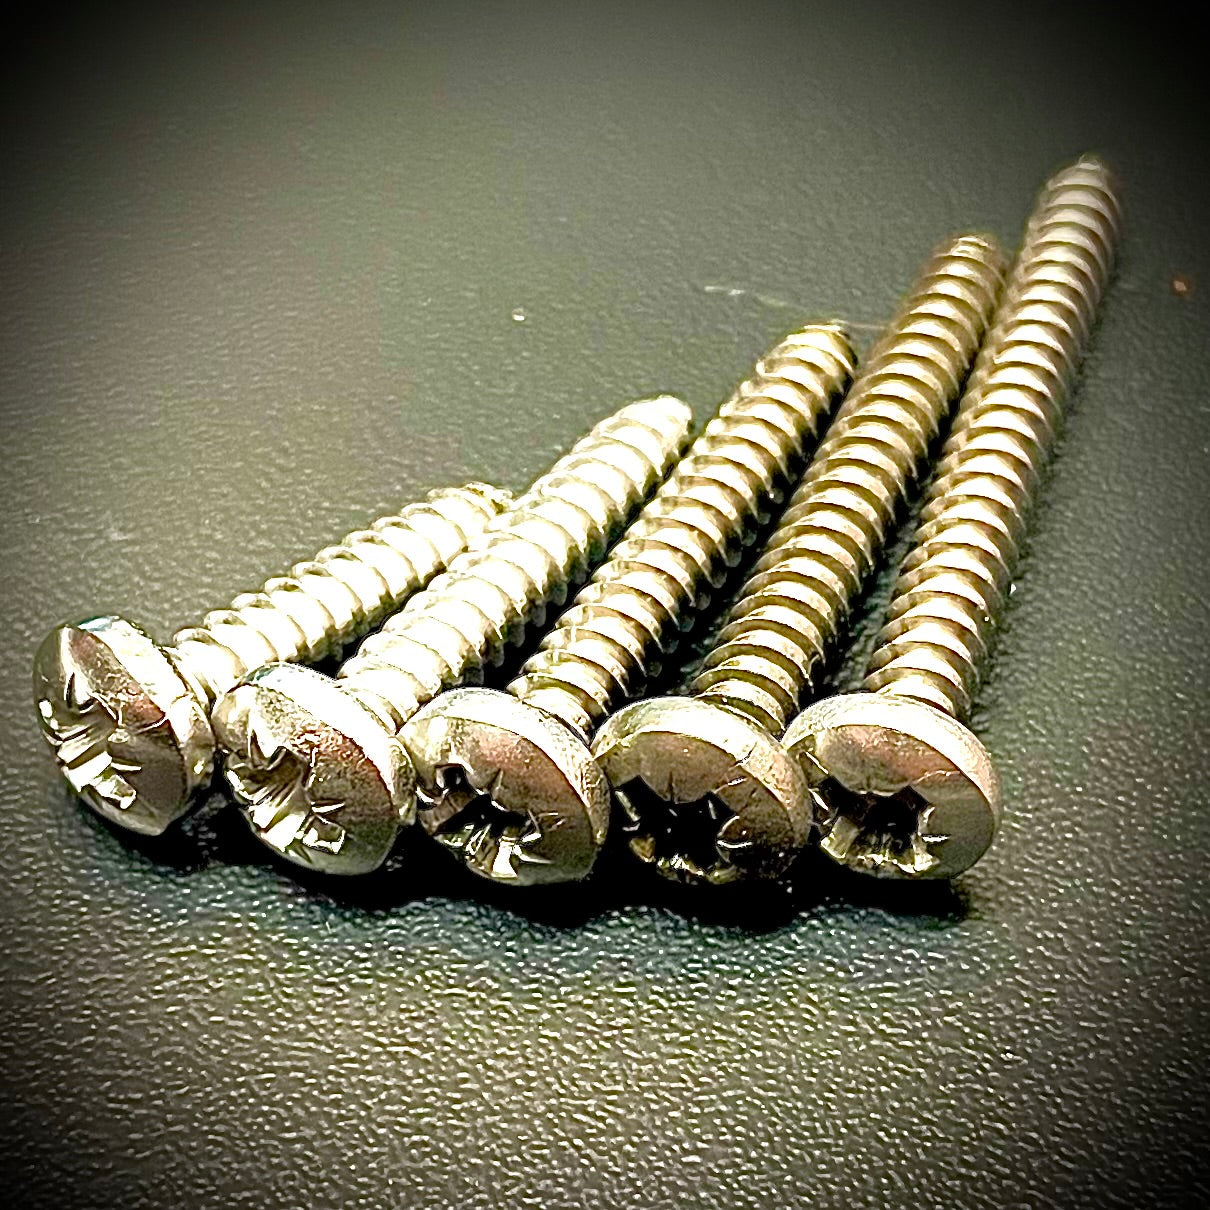 No. 6, 3.5mm Pozi Pan Self Tapping Screws AB Point A2/304 Stainless - Fixaball Ltd. Fixings and Fasteners UK